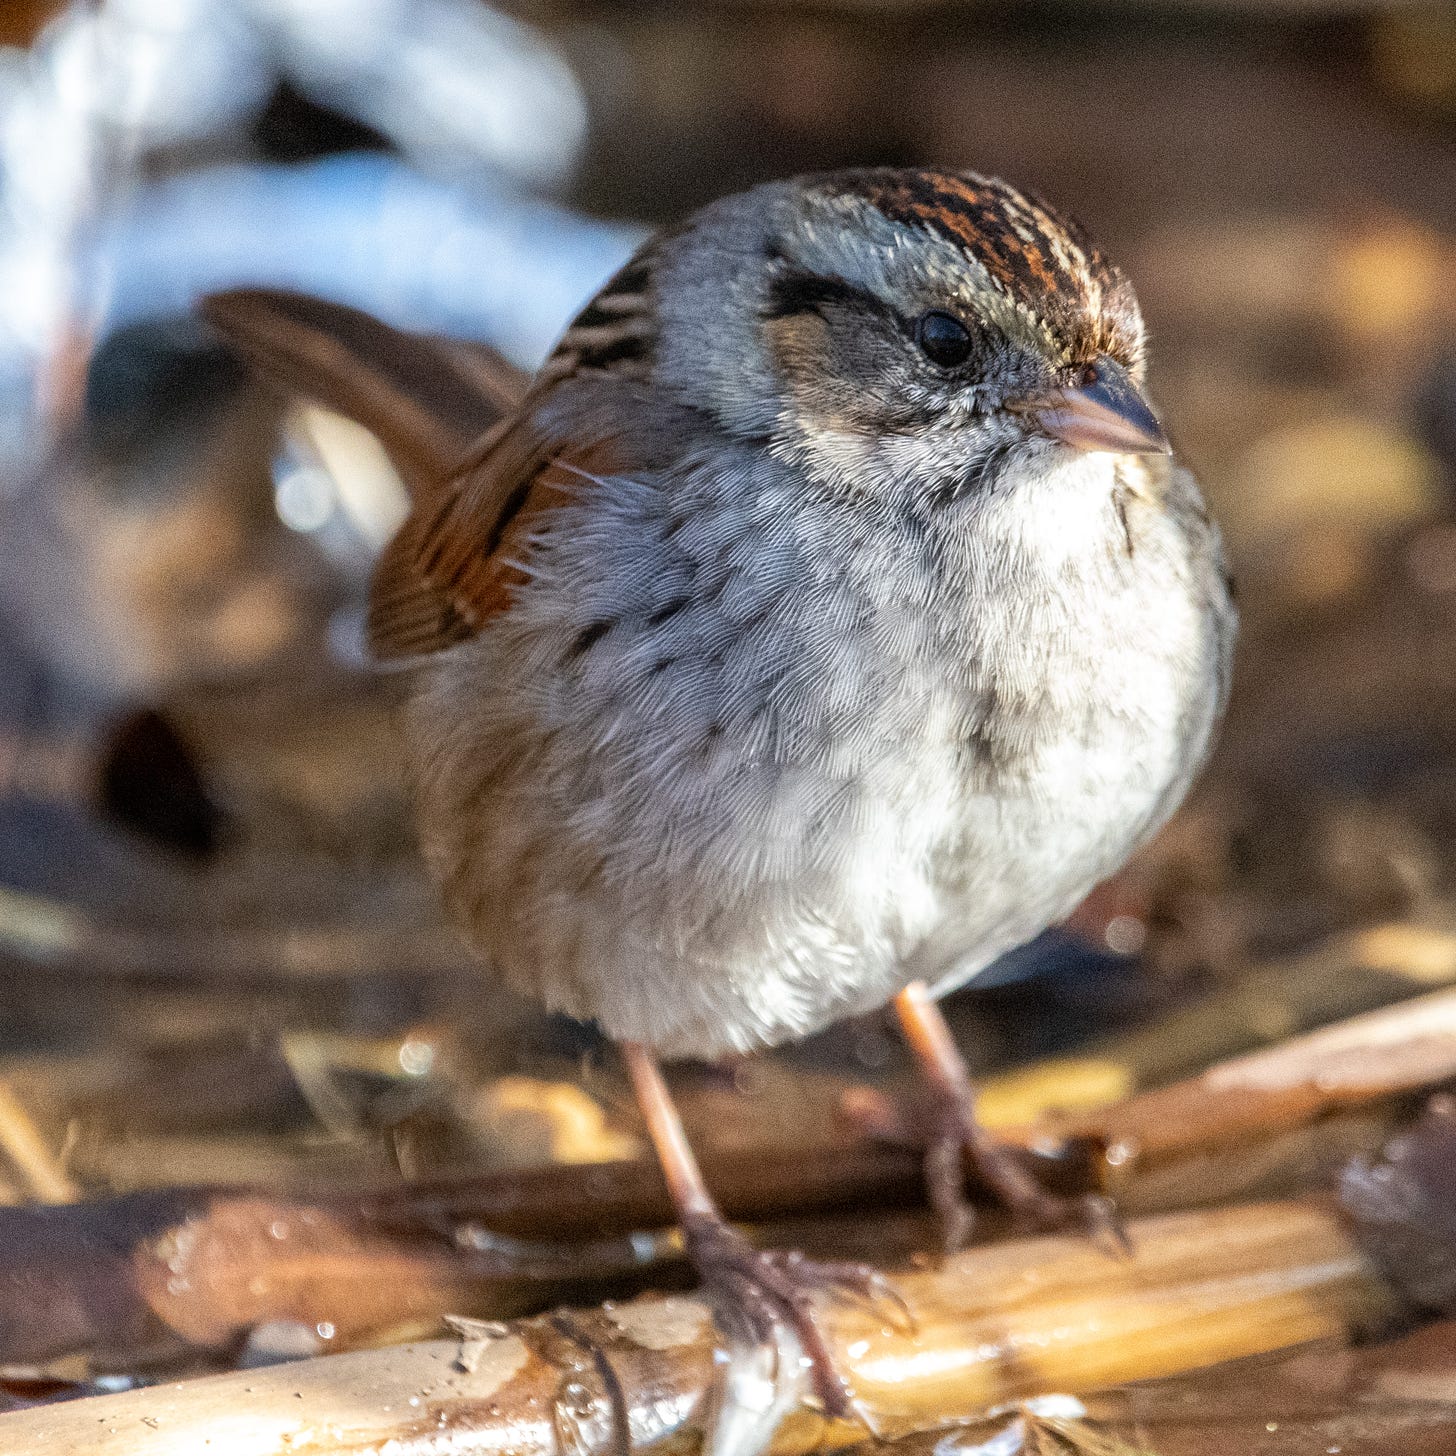 A swamp sparrow regards the camera almost coquettishly, head slightly cocked